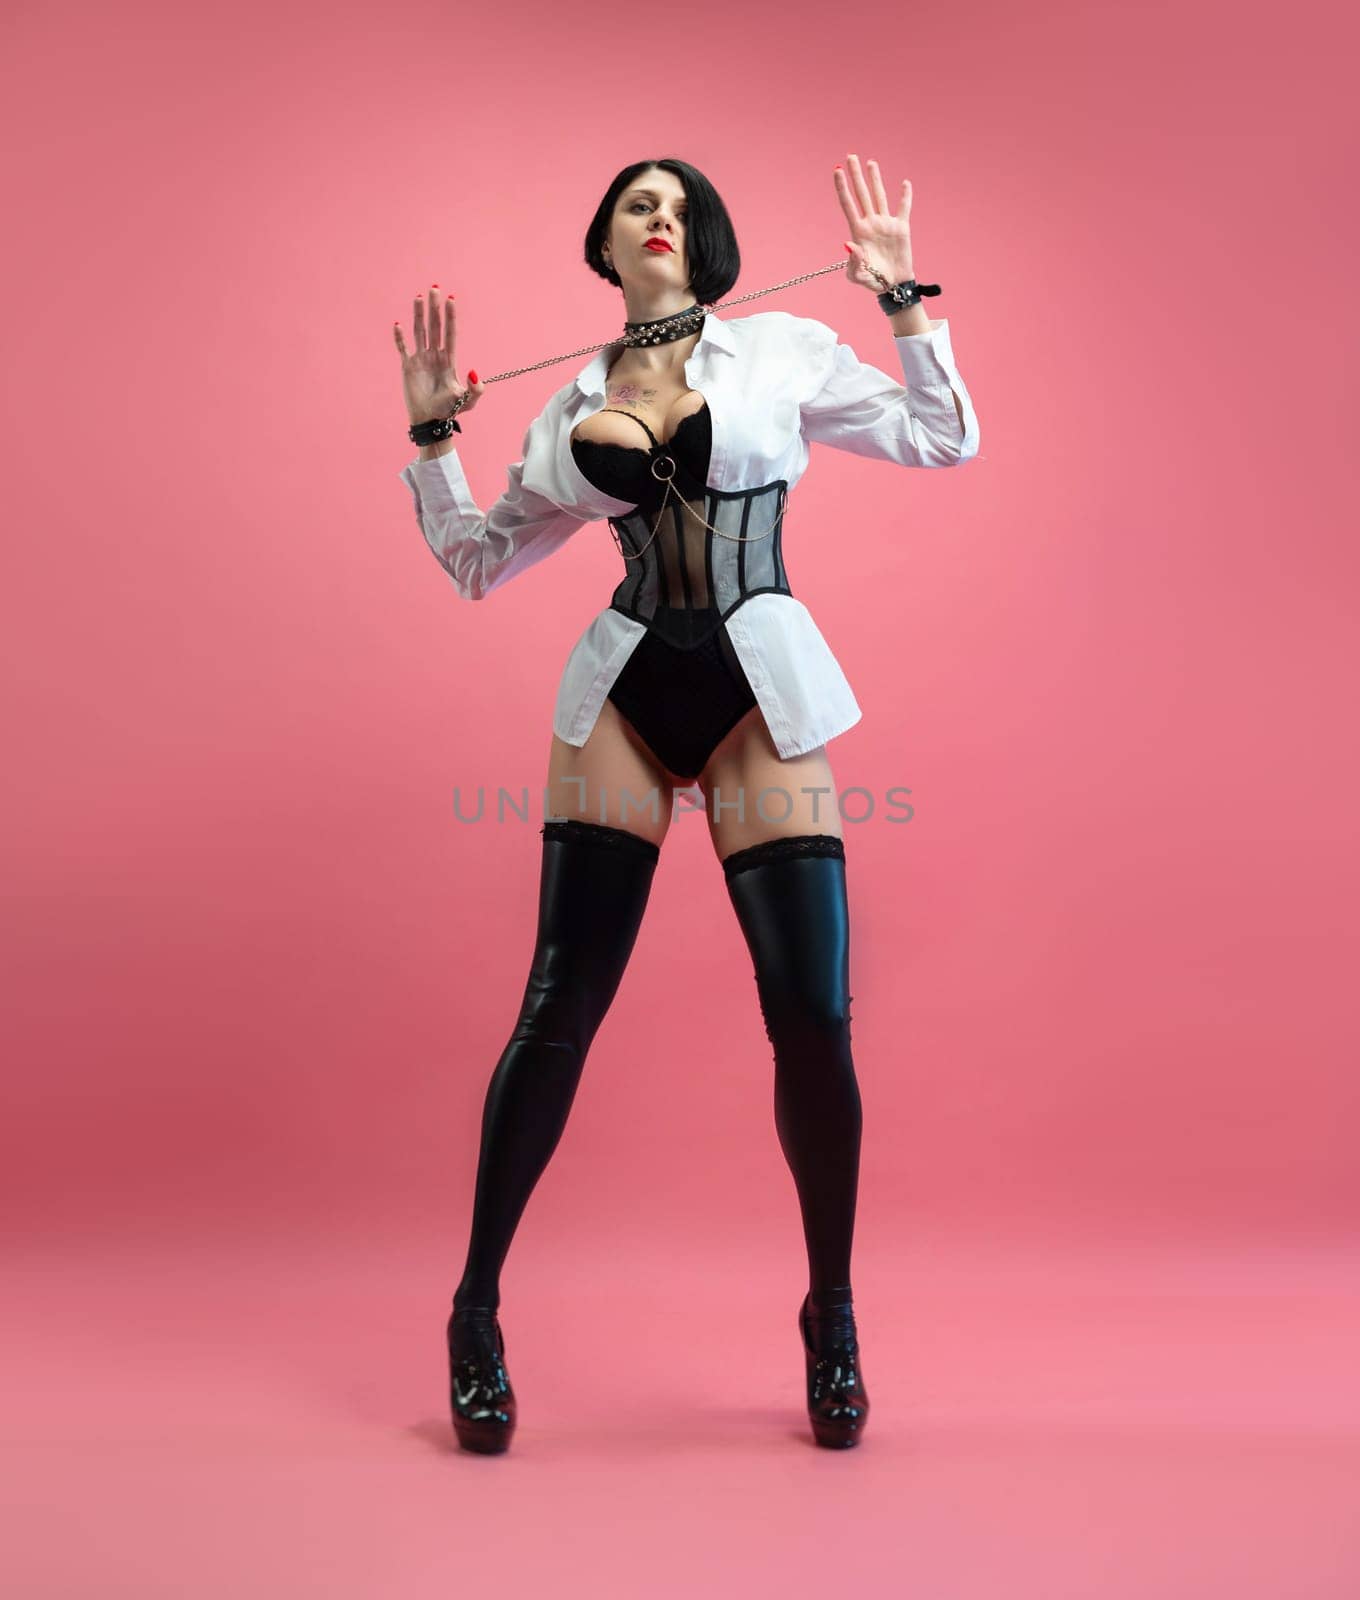 sexy woman with glasses, in a BDSM mistress costume in stockings, posing sexually on pink copy paste background